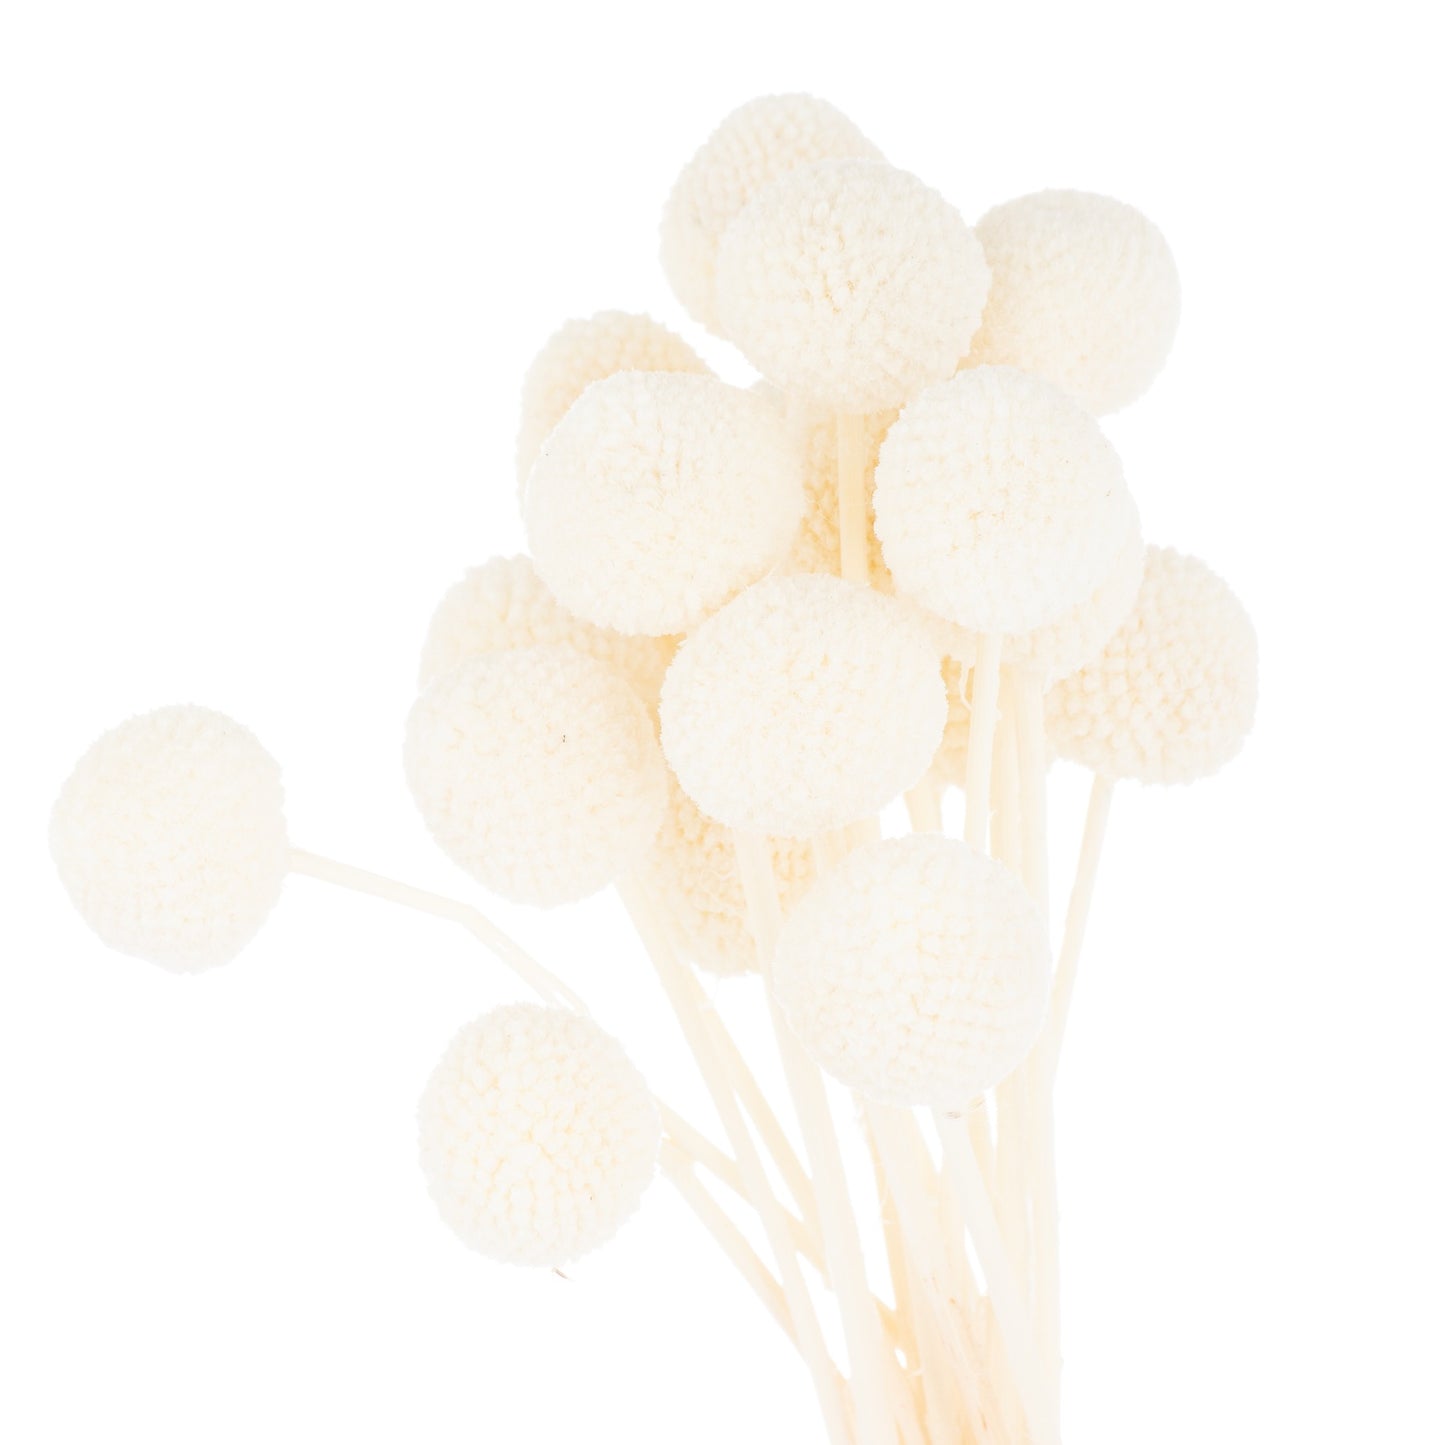 Dried White Billy Ball Bunch Of 20